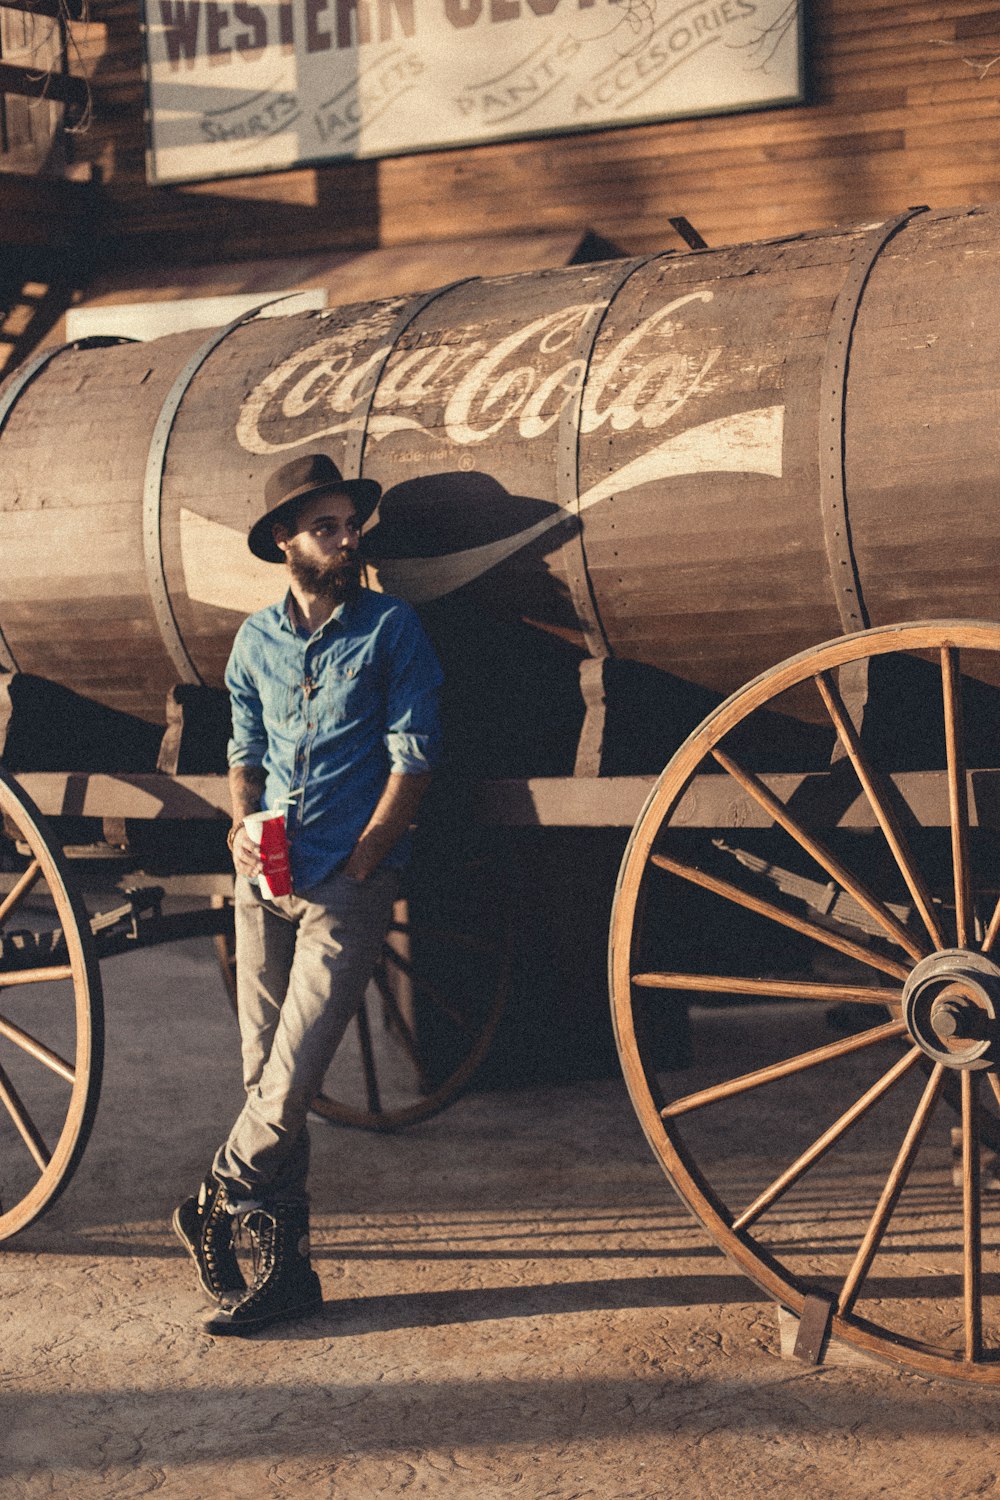 man in blue chambray sports shirt leaning on Coca-Cola barrel